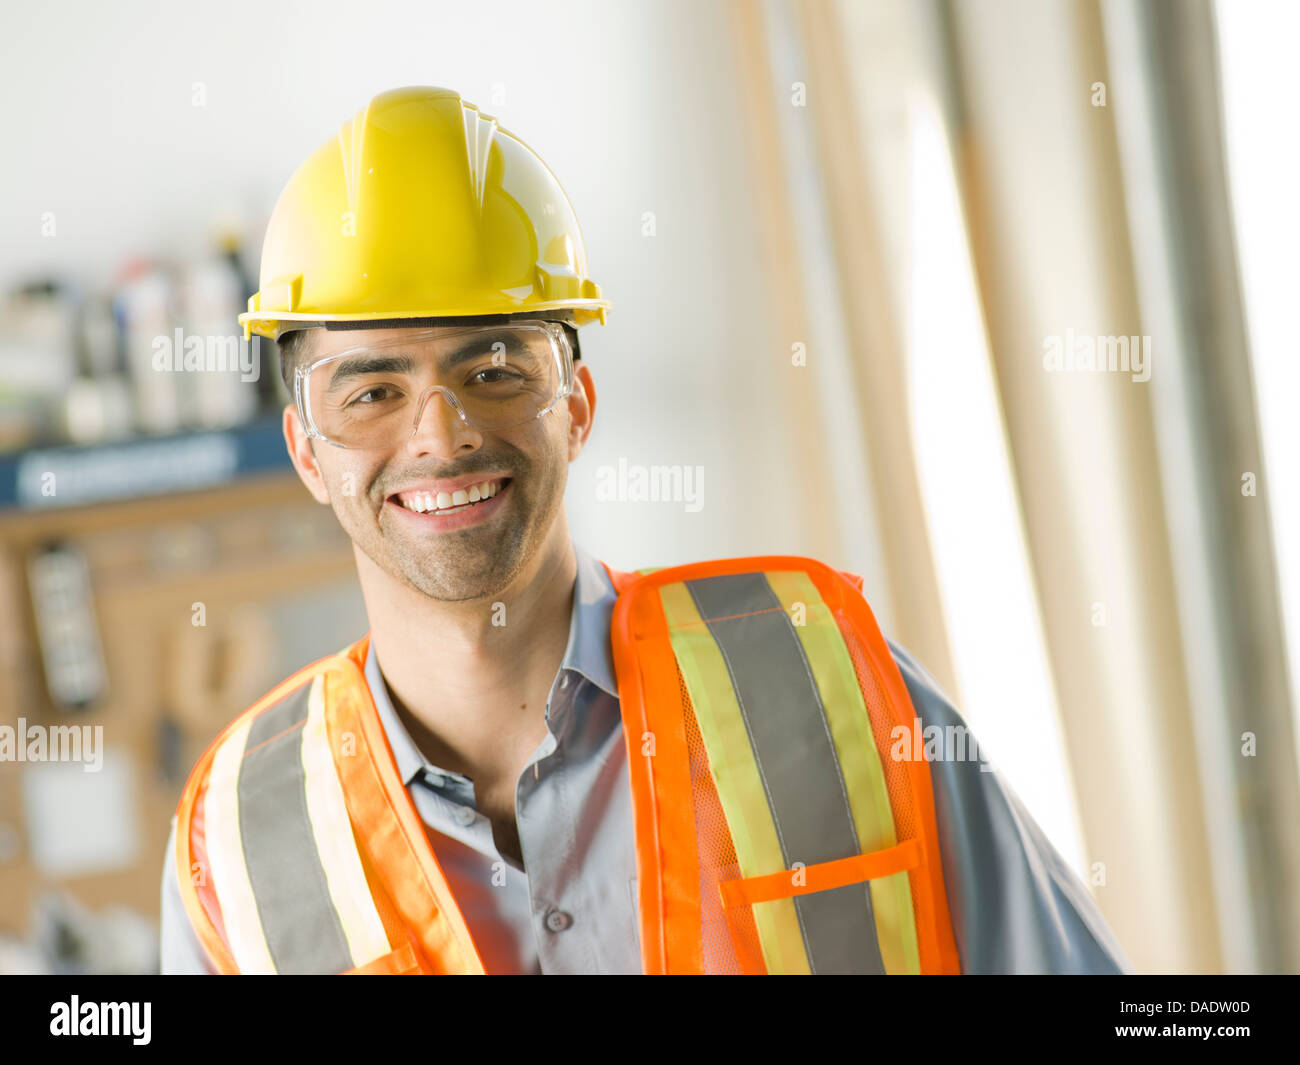 Mid adult construction worker smiling, portrait Stock Photo